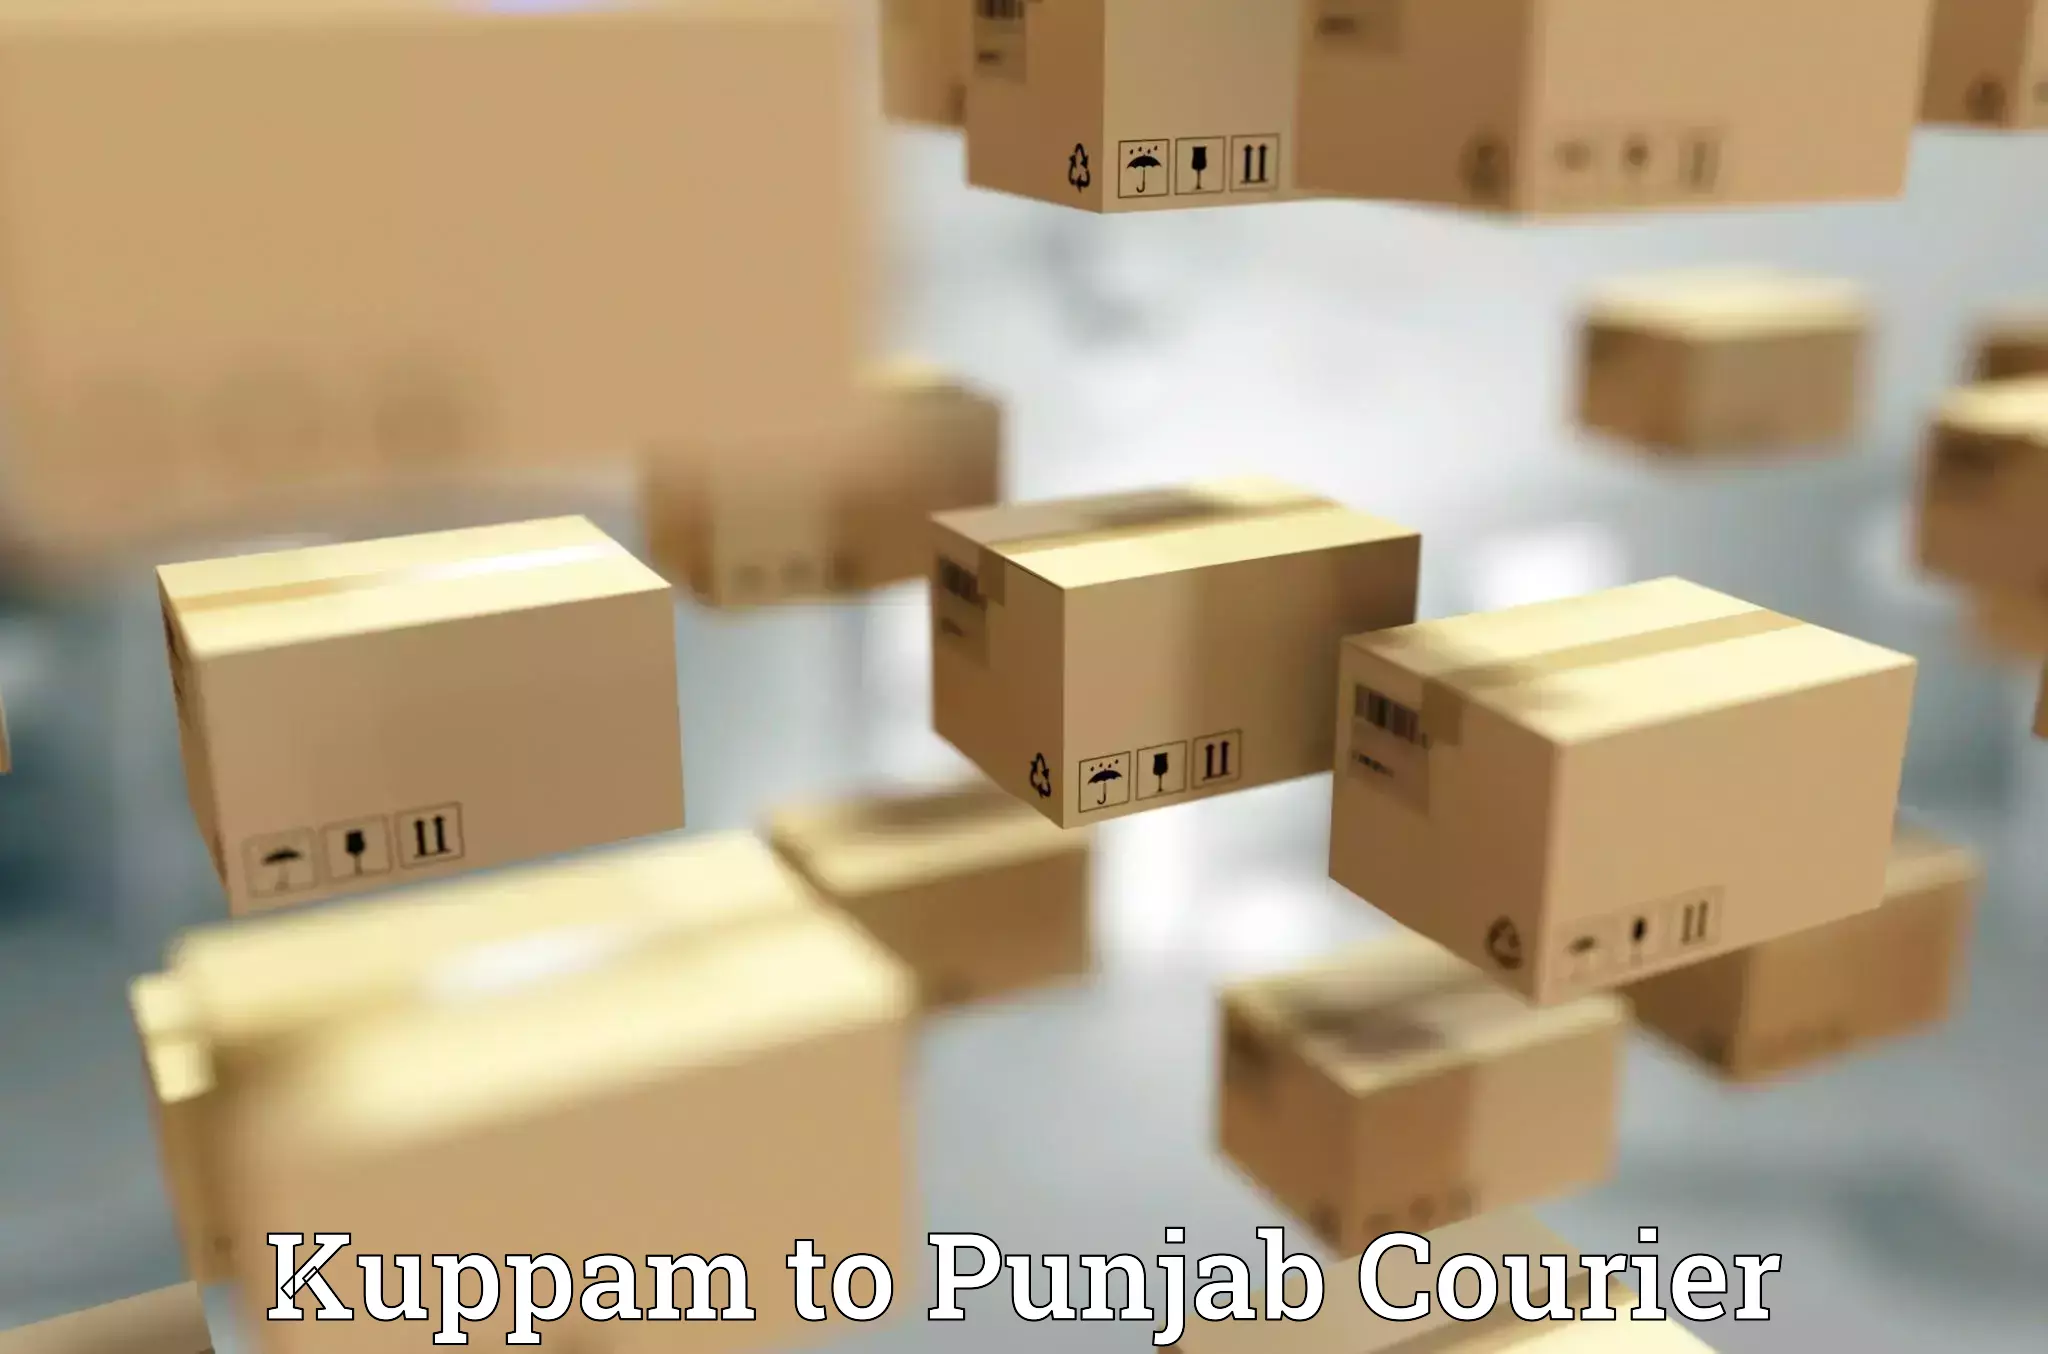 Automated parcel services Kuppam to Punjab